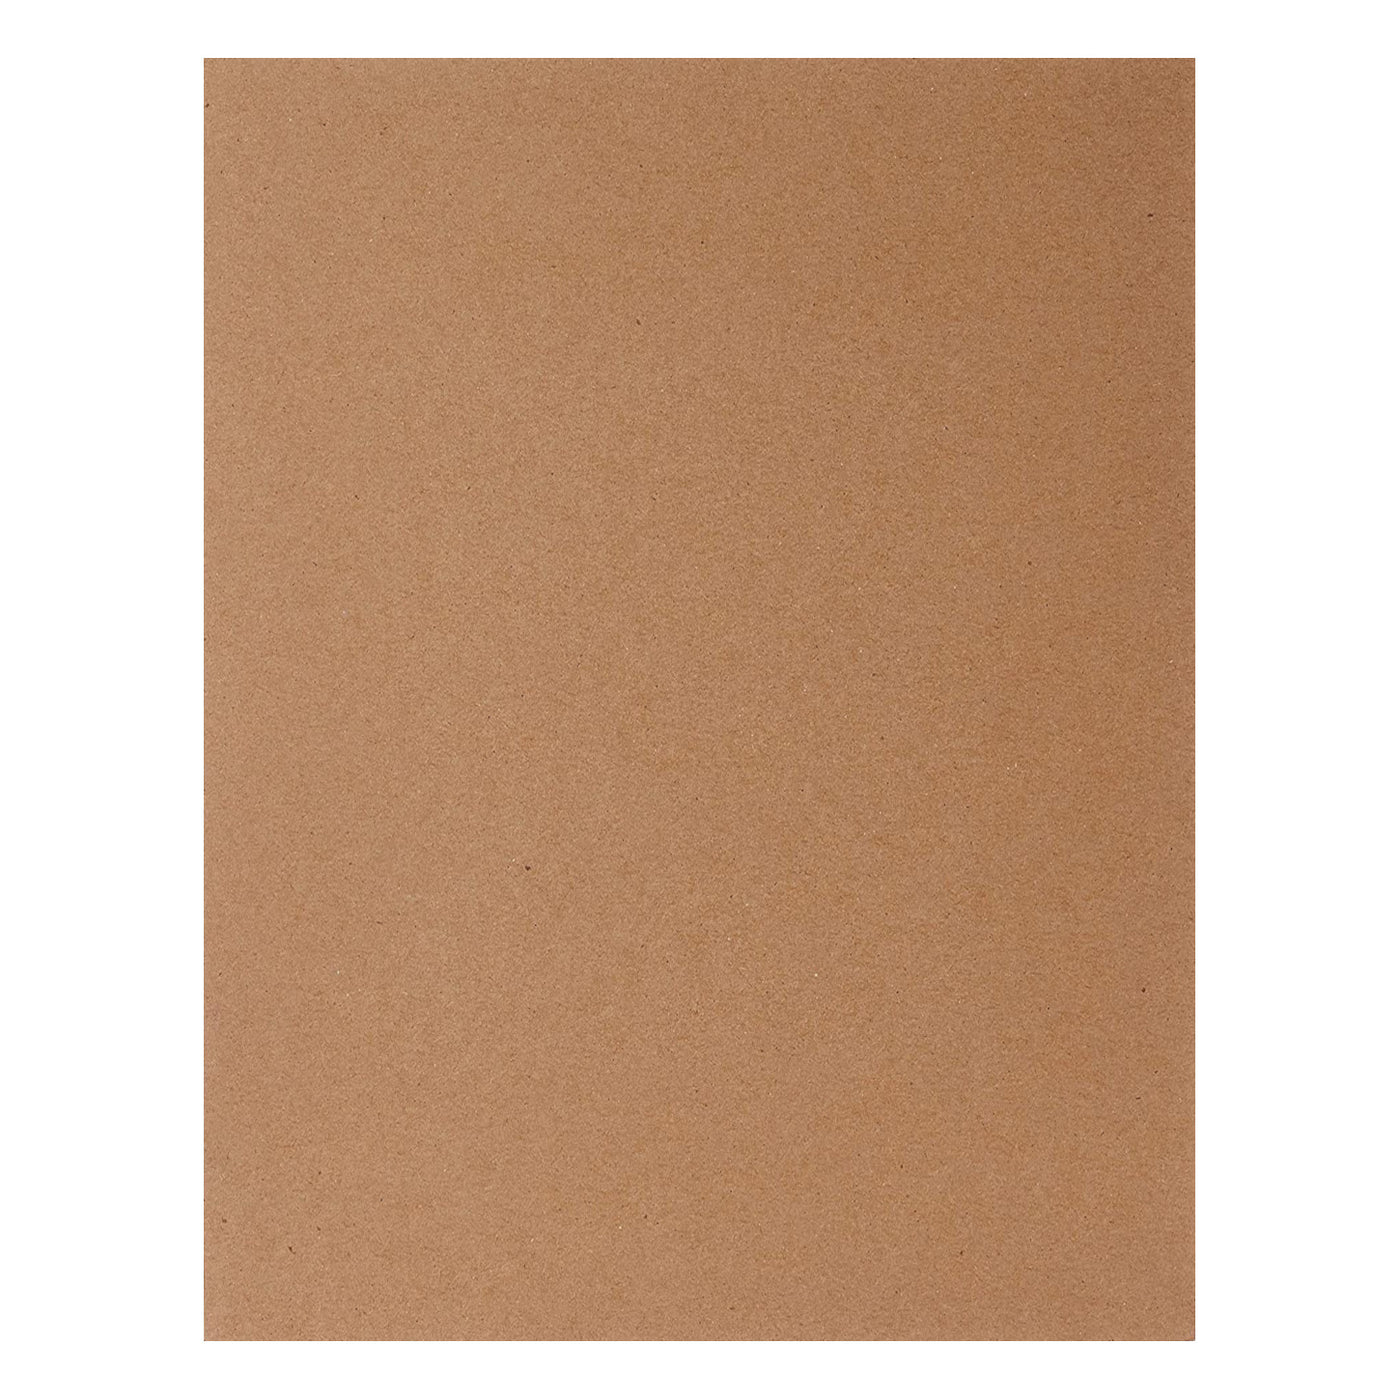 Chipboard Sheets 8.5 x 11 - 100 Sheets of 22 Point India